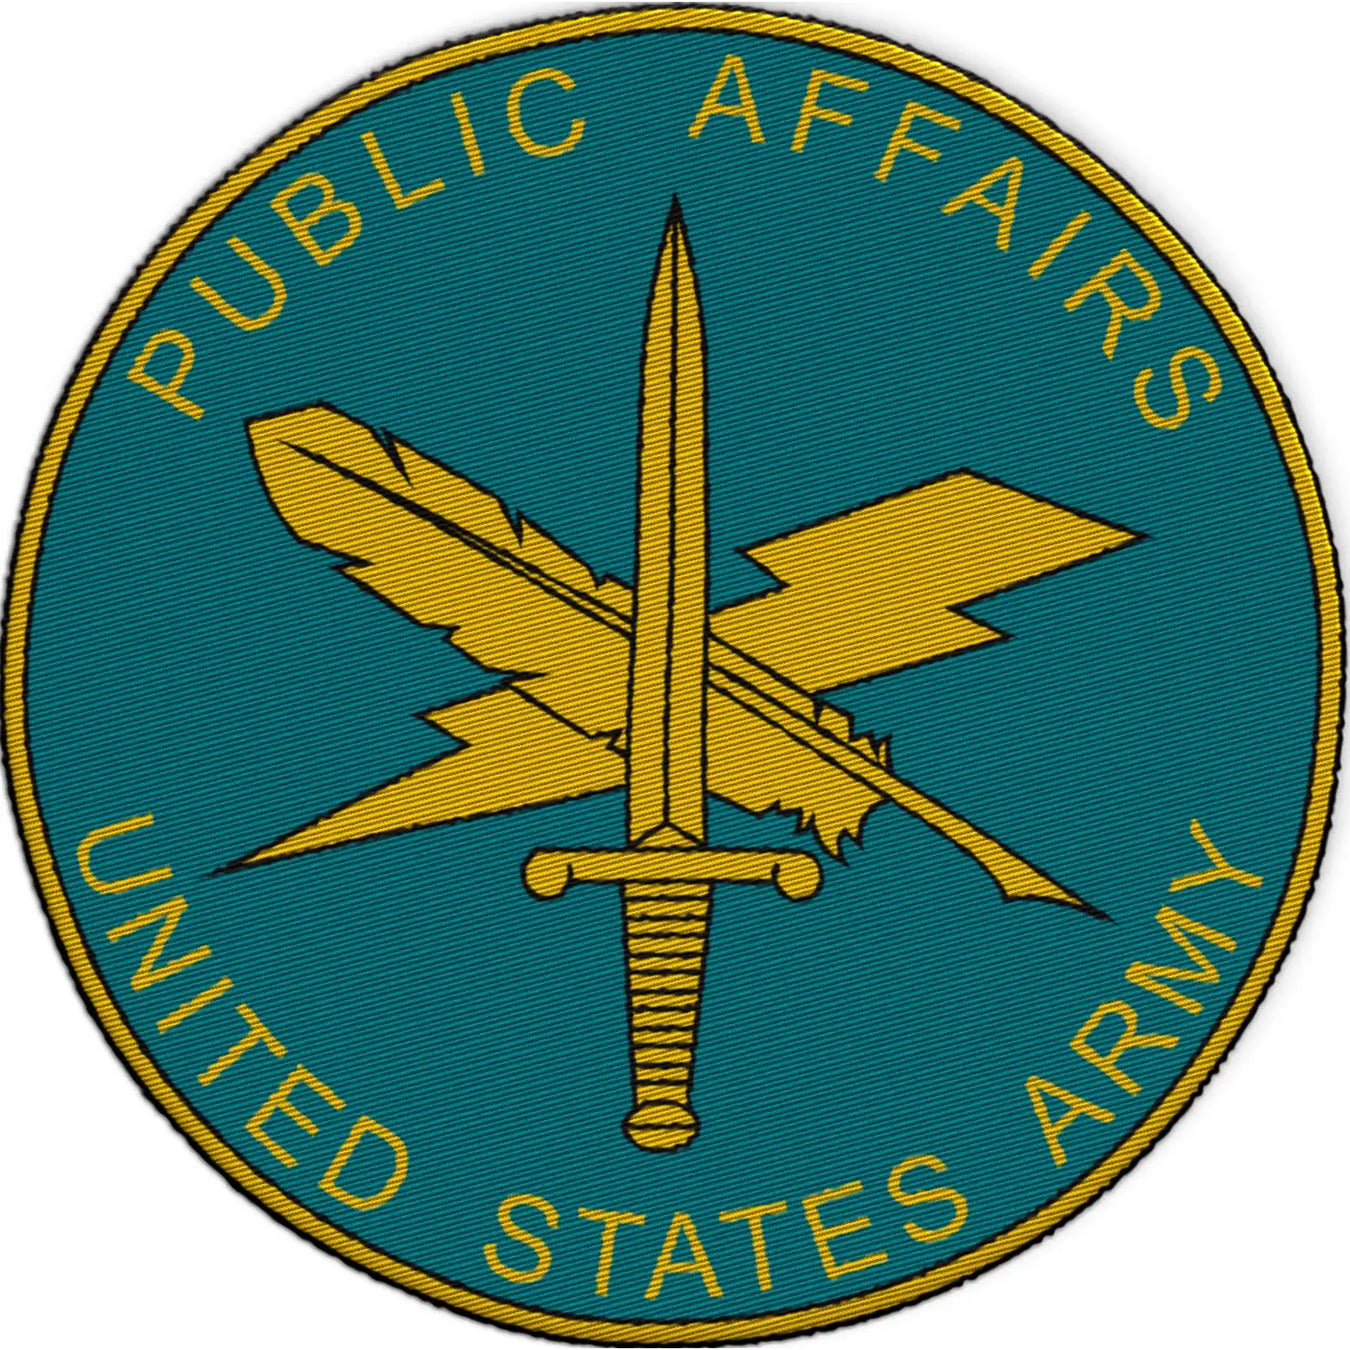 U.S. Army Public Affairs Patches